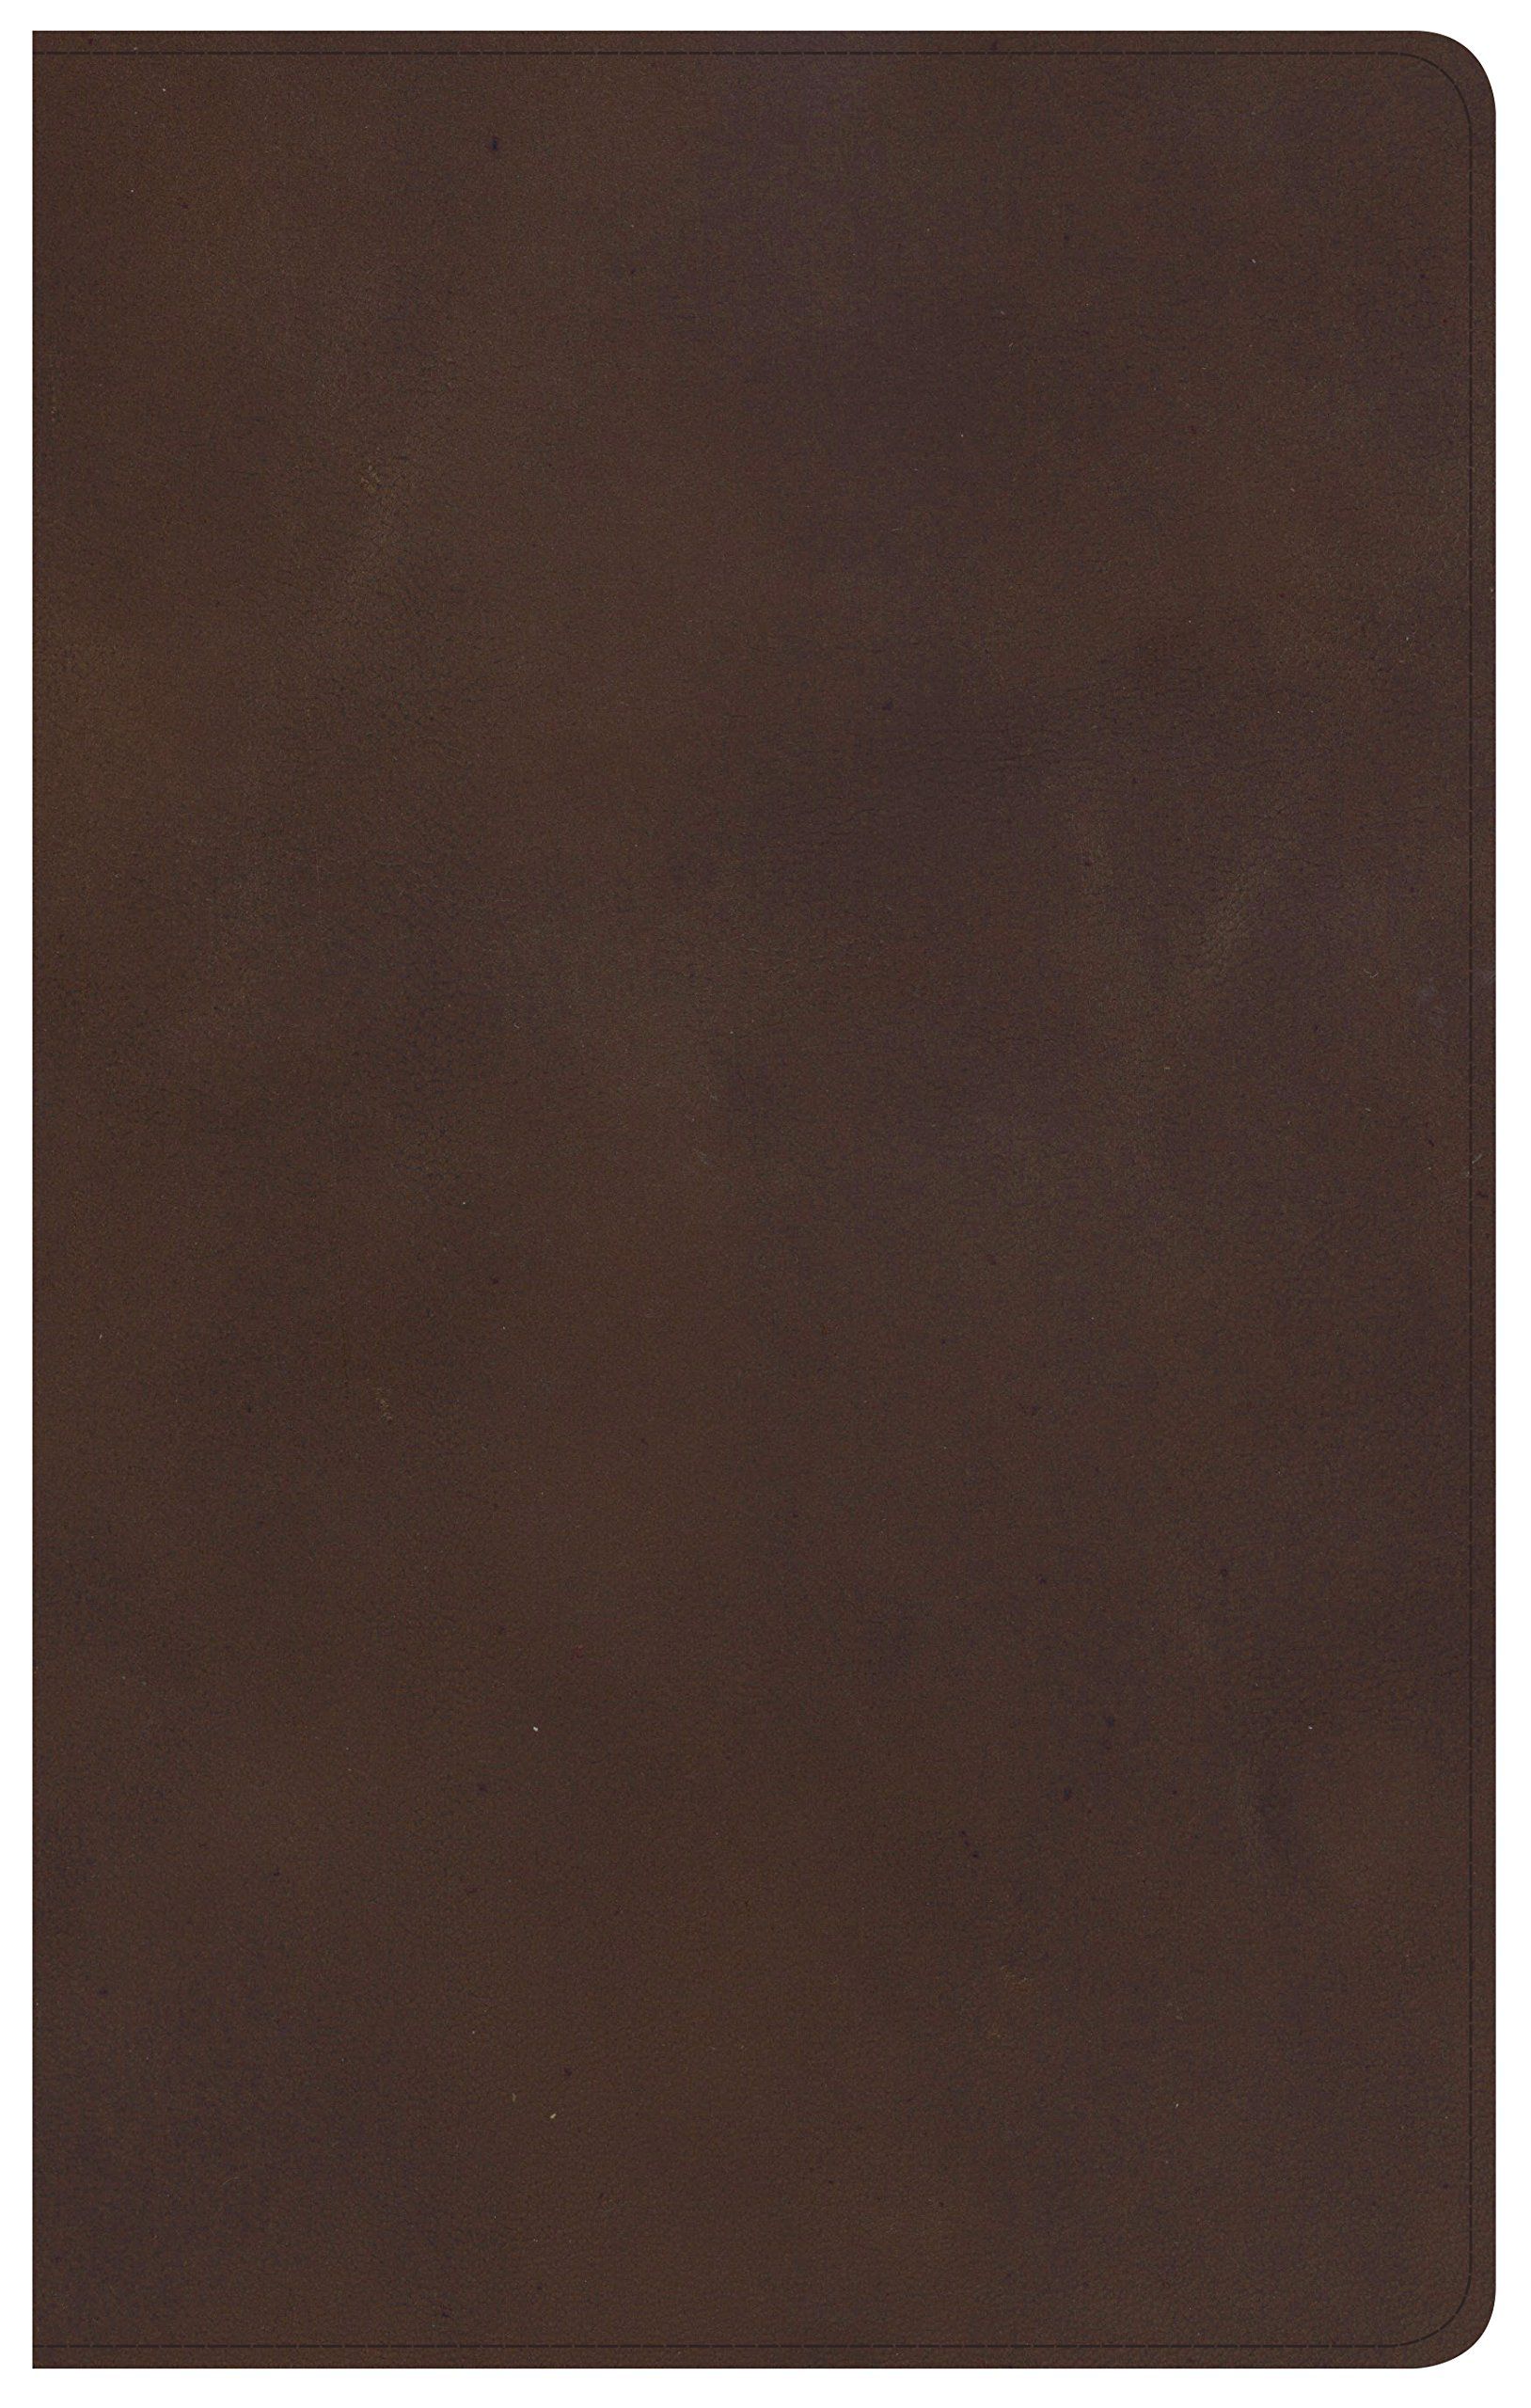 KJV Ultrathin Reference Bible, Brown Genuine Leather, Indexed